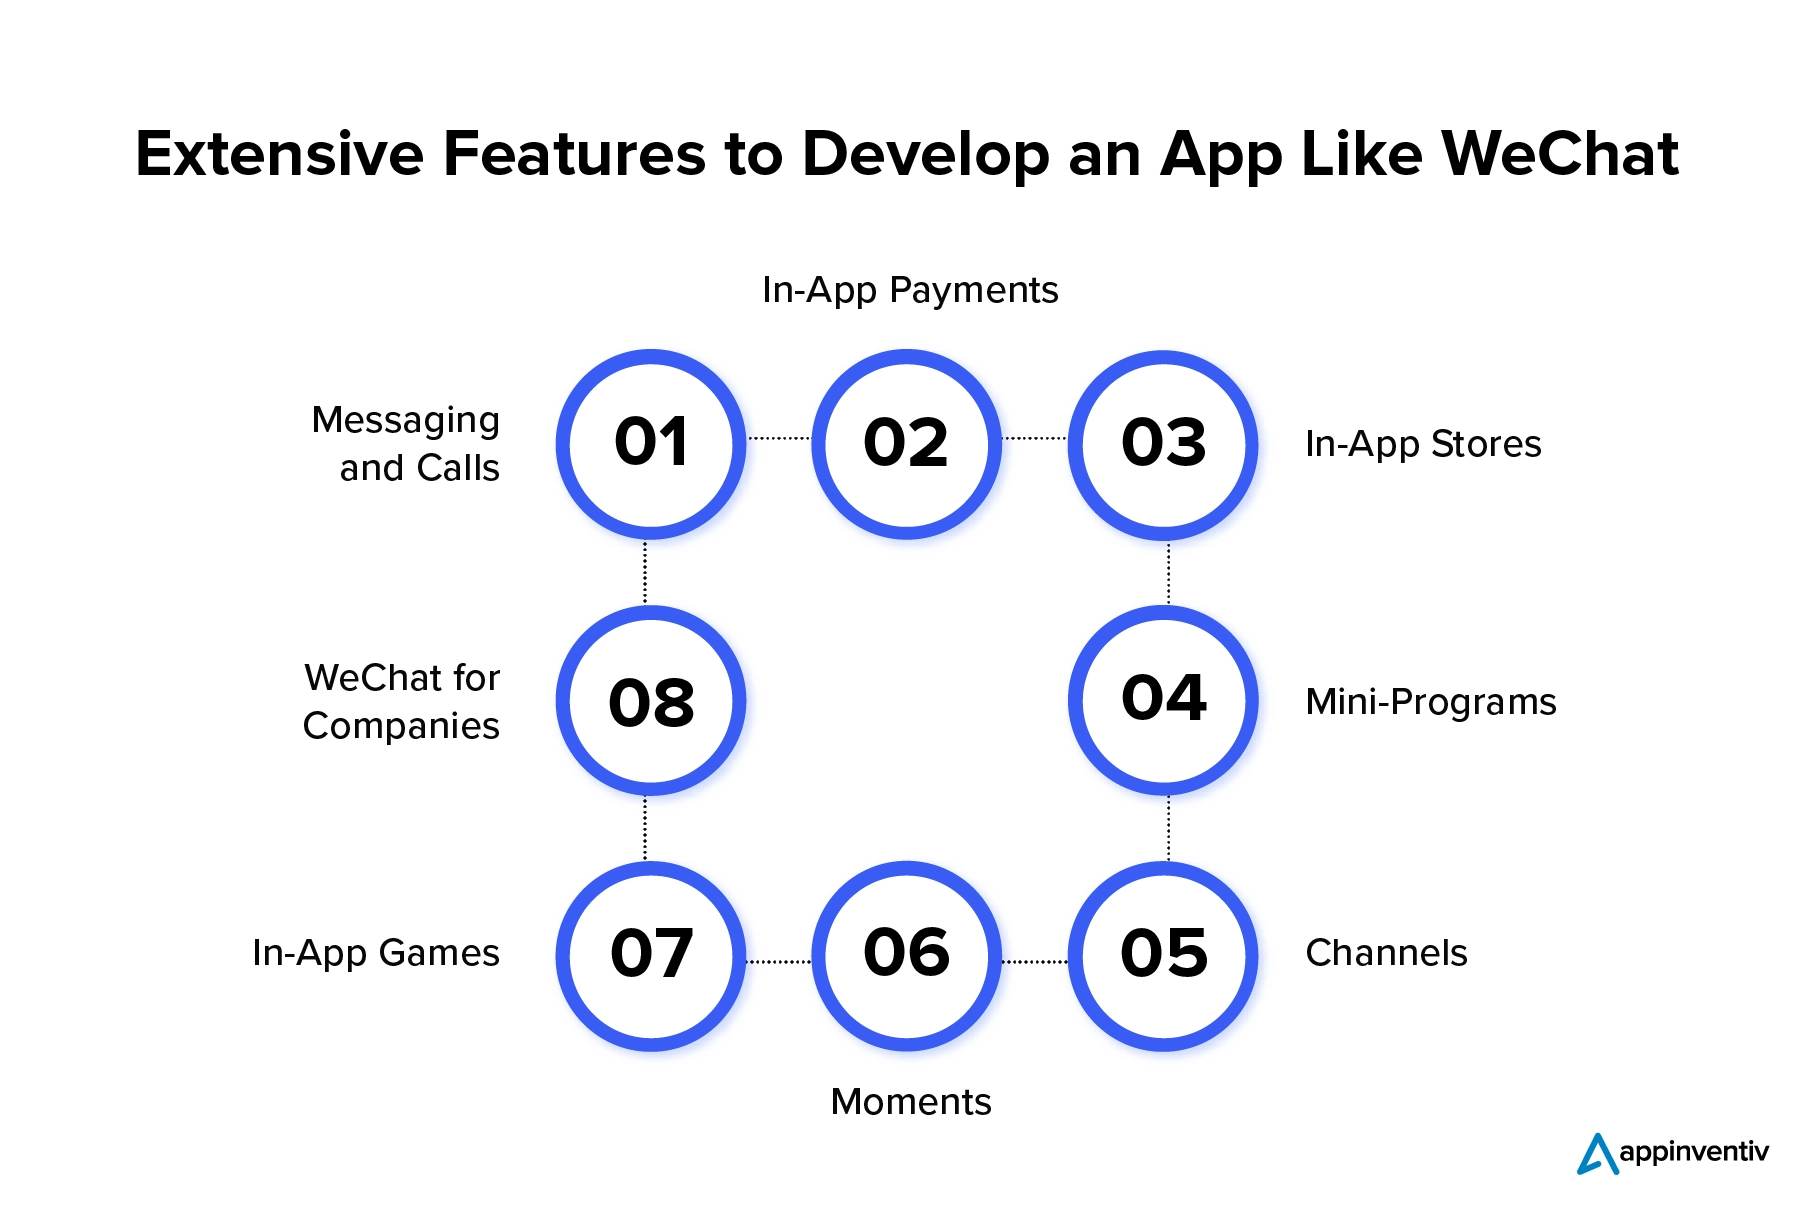 Extensive Features to Develop an App Like WeChat